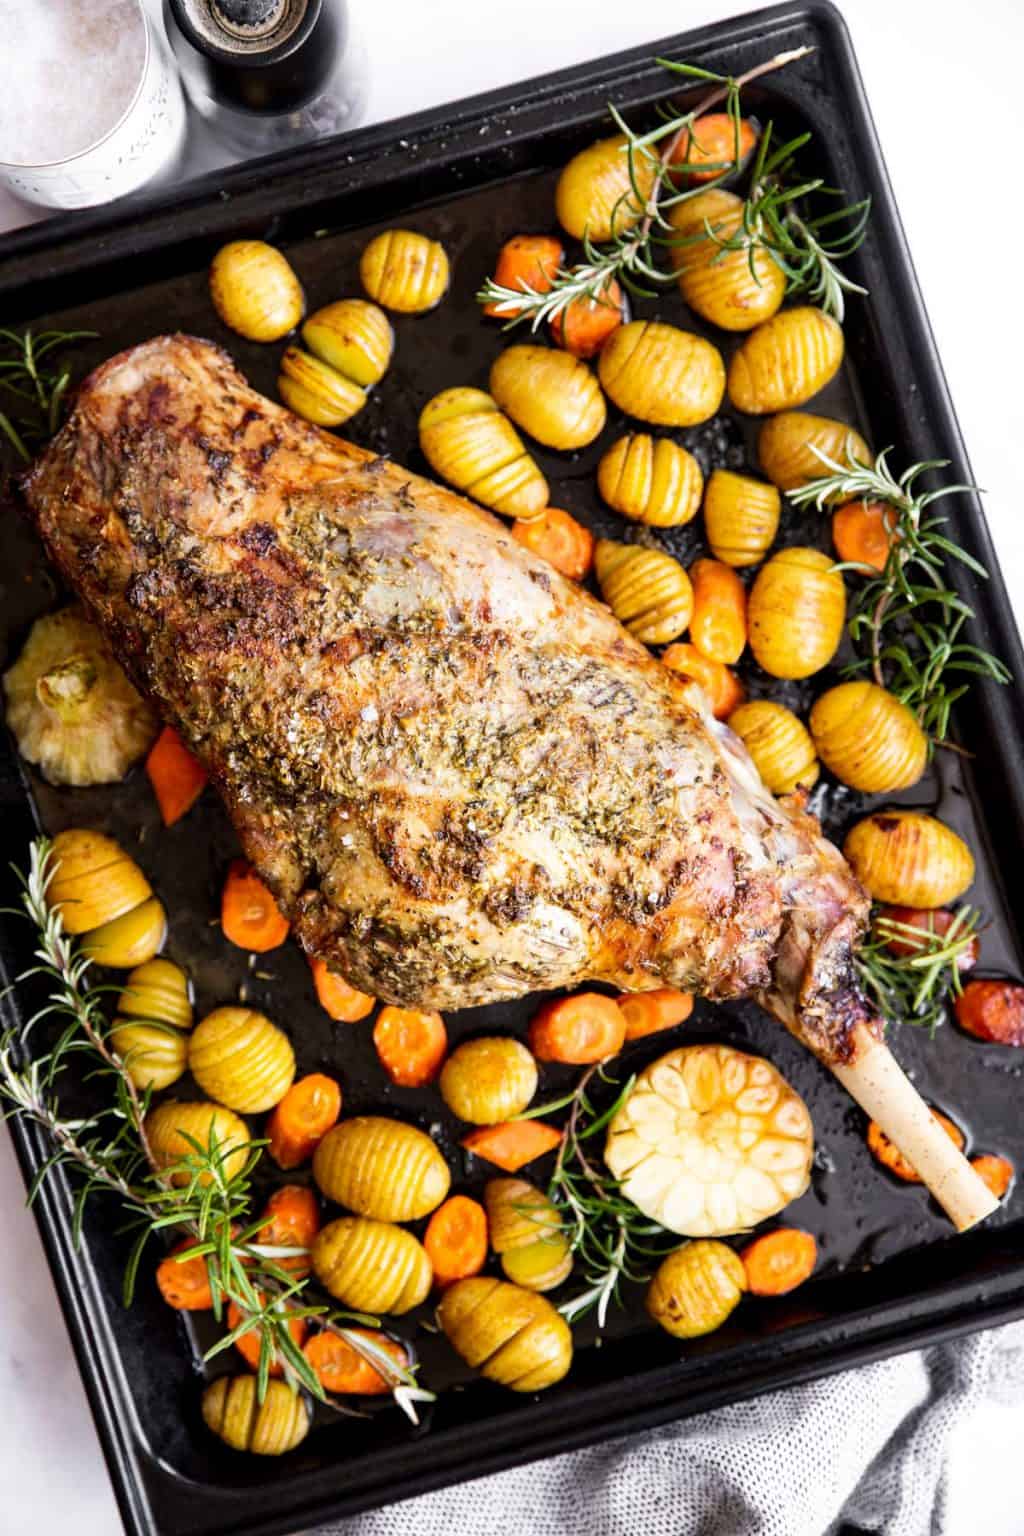 oven-roasted-leg-of-lamb-recipe-video-savory-nothings